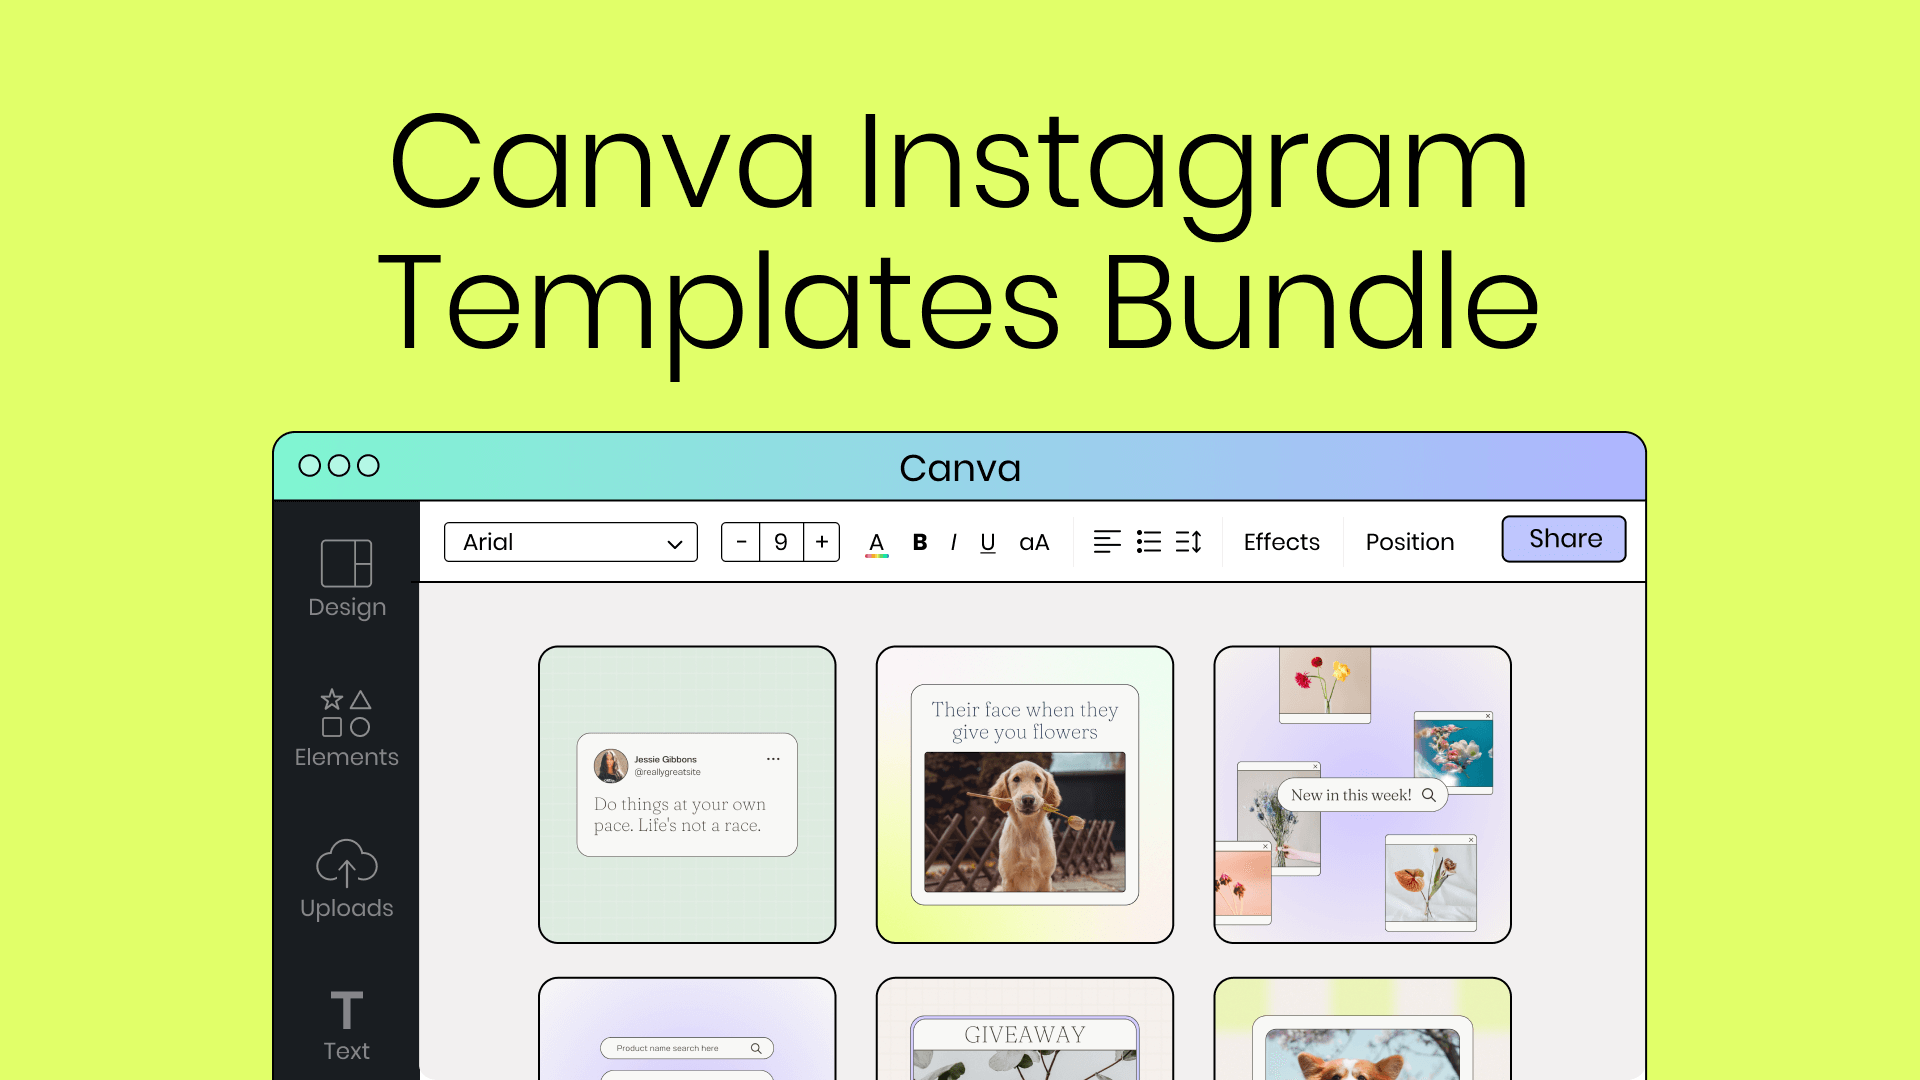 Thumbnail image showing Canva template designs including a meme image with a dog, an inspirational quote, and more